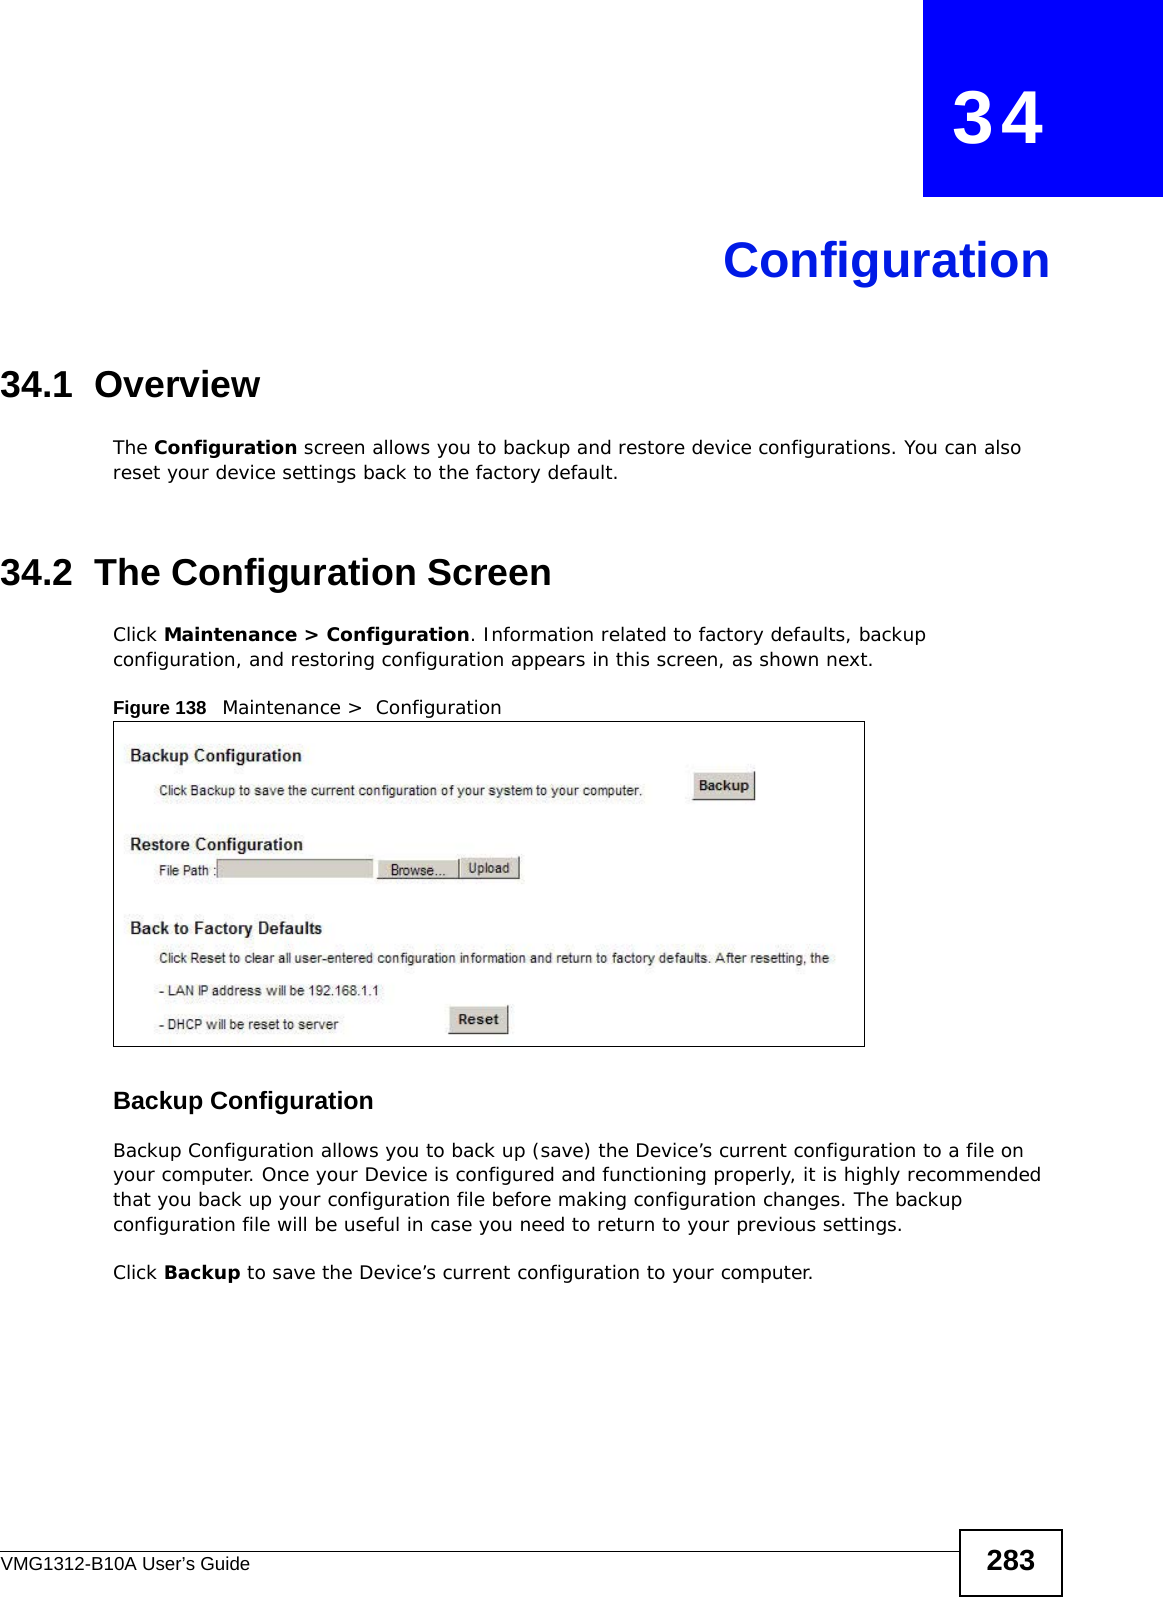 VMG1312-B10A User’s Guide 283CHAPTER   34Configuration34.1  OverviewThe Configuration screen allows you to backup and restore device configurations. You can also reset your device settings back to the factory default.34.2  The Configuration Screen Click Maintenance &gt; Configuration. Information related to factory defaults, backup configuration, and restoring configuration appears in this screen, as shown next.Figure 138   Maintenance &gt;  ConfigurationBackup Configuration Backup Configuration allows you to back up (save) the Device’s current configuration to a file on your computer. Once your Device is configured and functioning properly, it is highly recommended that you back up your configuration file before making configuration changes. The backup configuration file will be useful in case you need to return to your previous settings. Click Backup to save the Device’s current configuration to your computer.